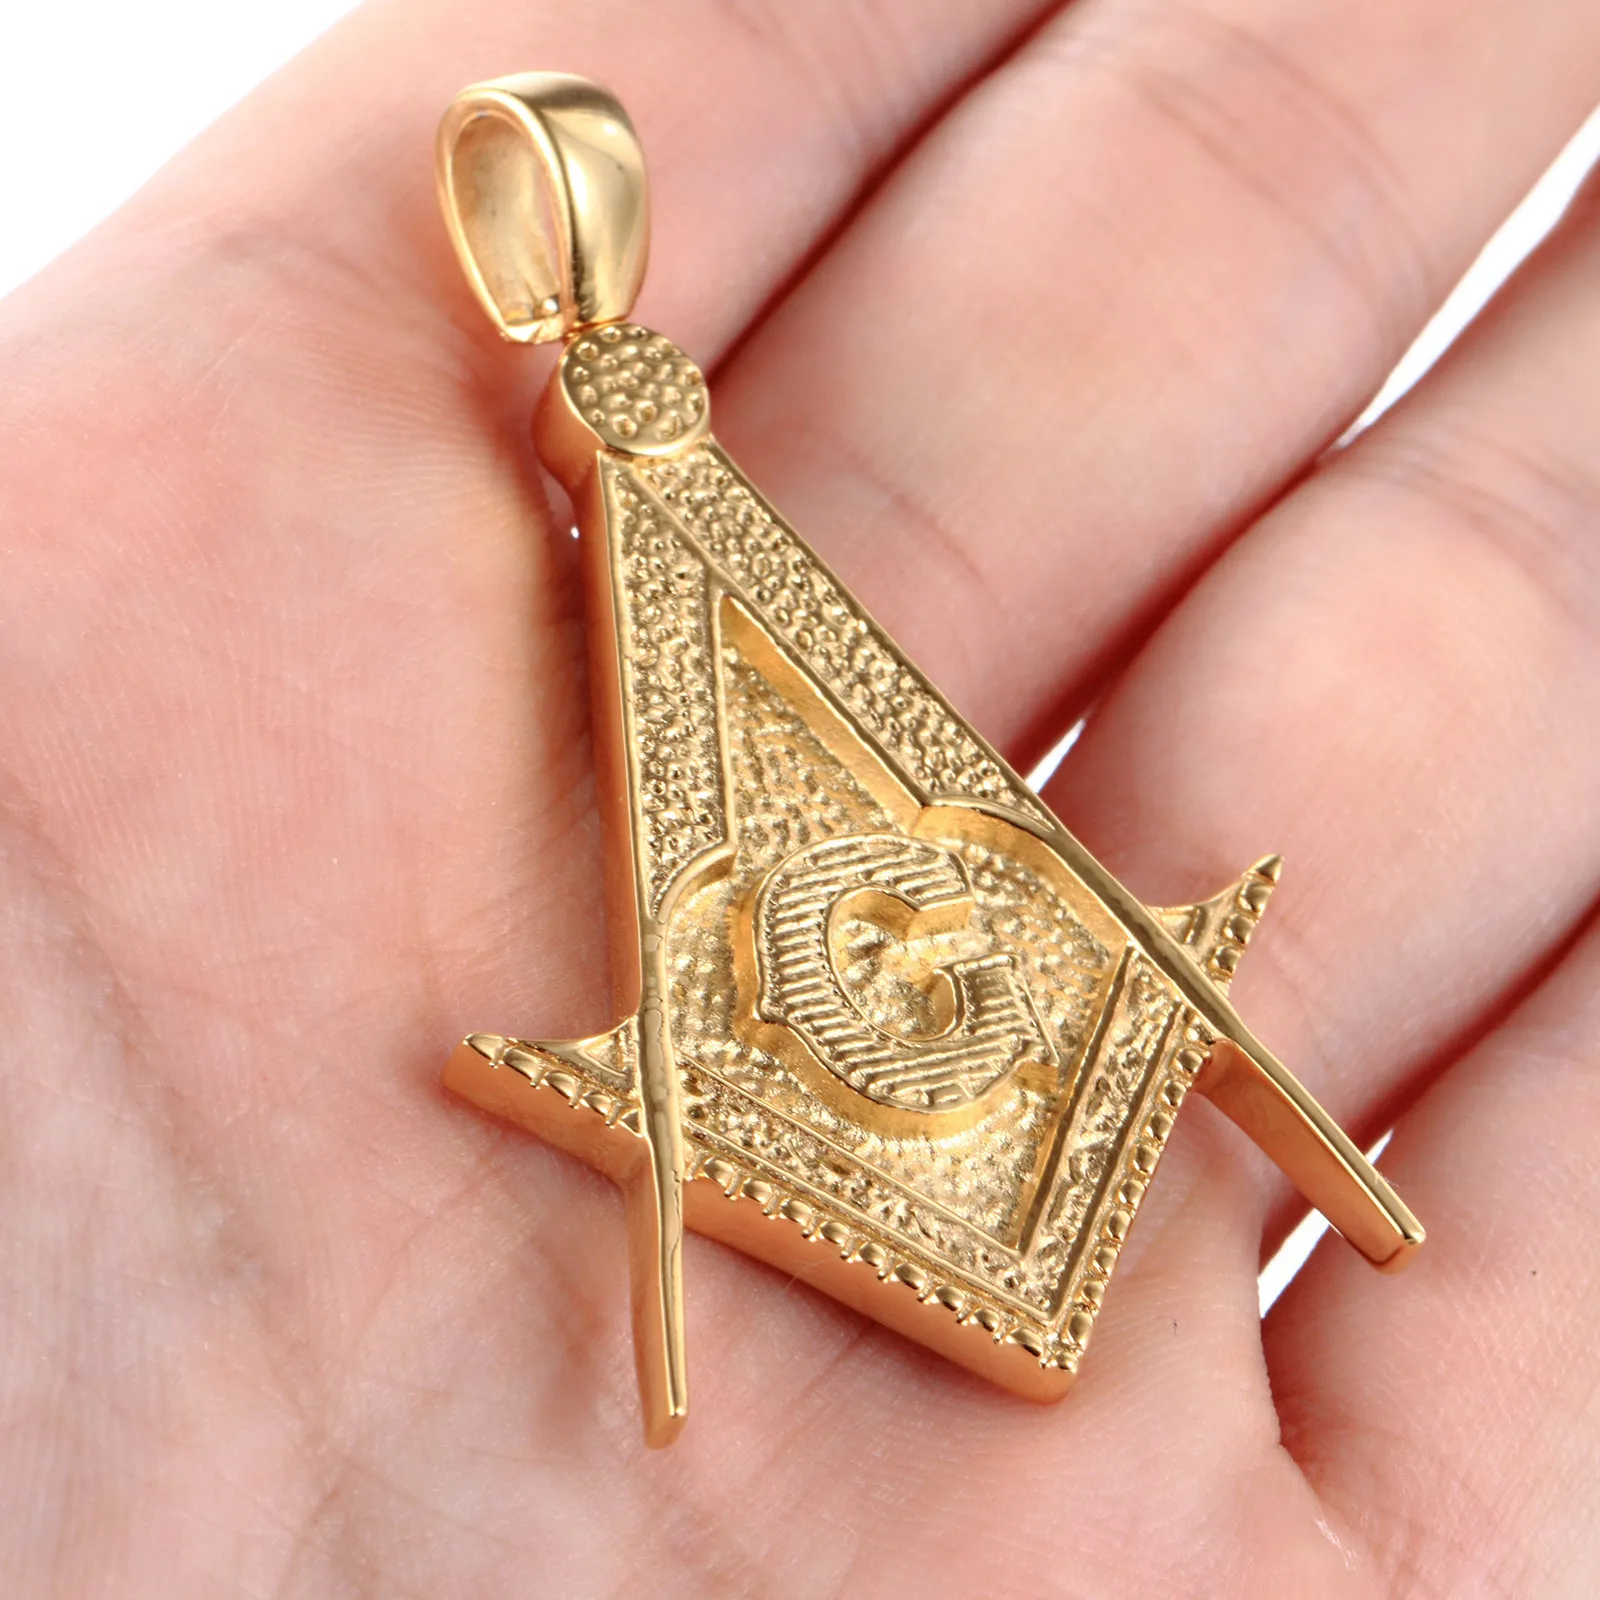 Popular fashion gold hiphop masonic free mason pendant necklace jewelry for men women wholesale stainless steel